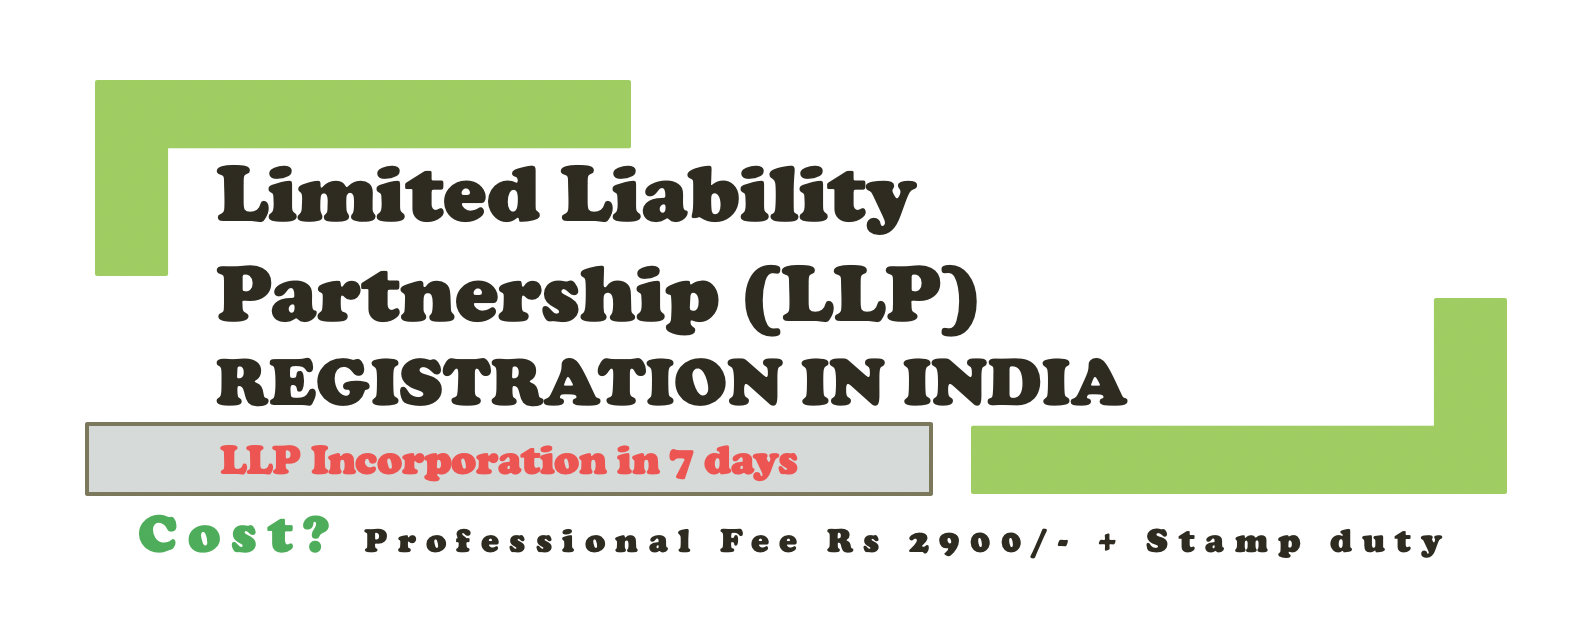 Limited Liability Partnership (LLP) Incorporation in India